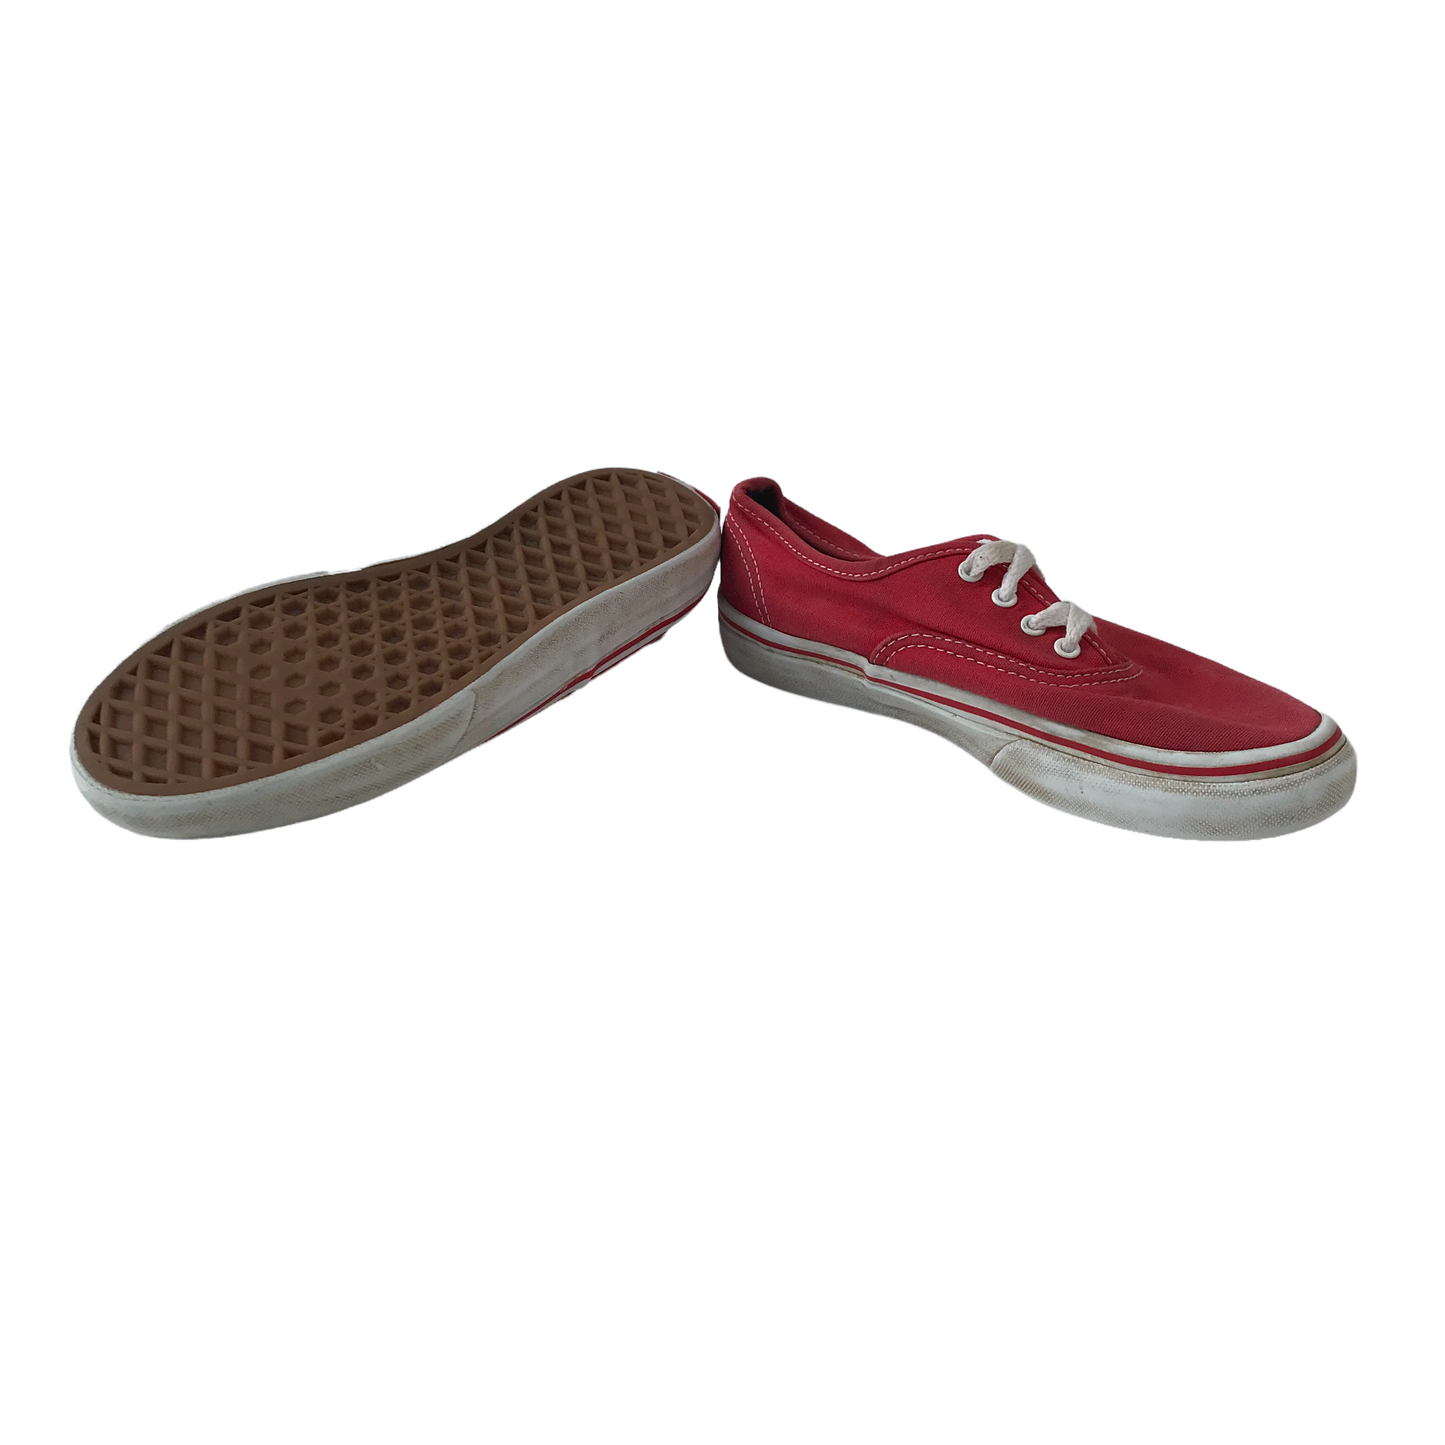 Vans Red Canvas Trainers Shoe Size 1